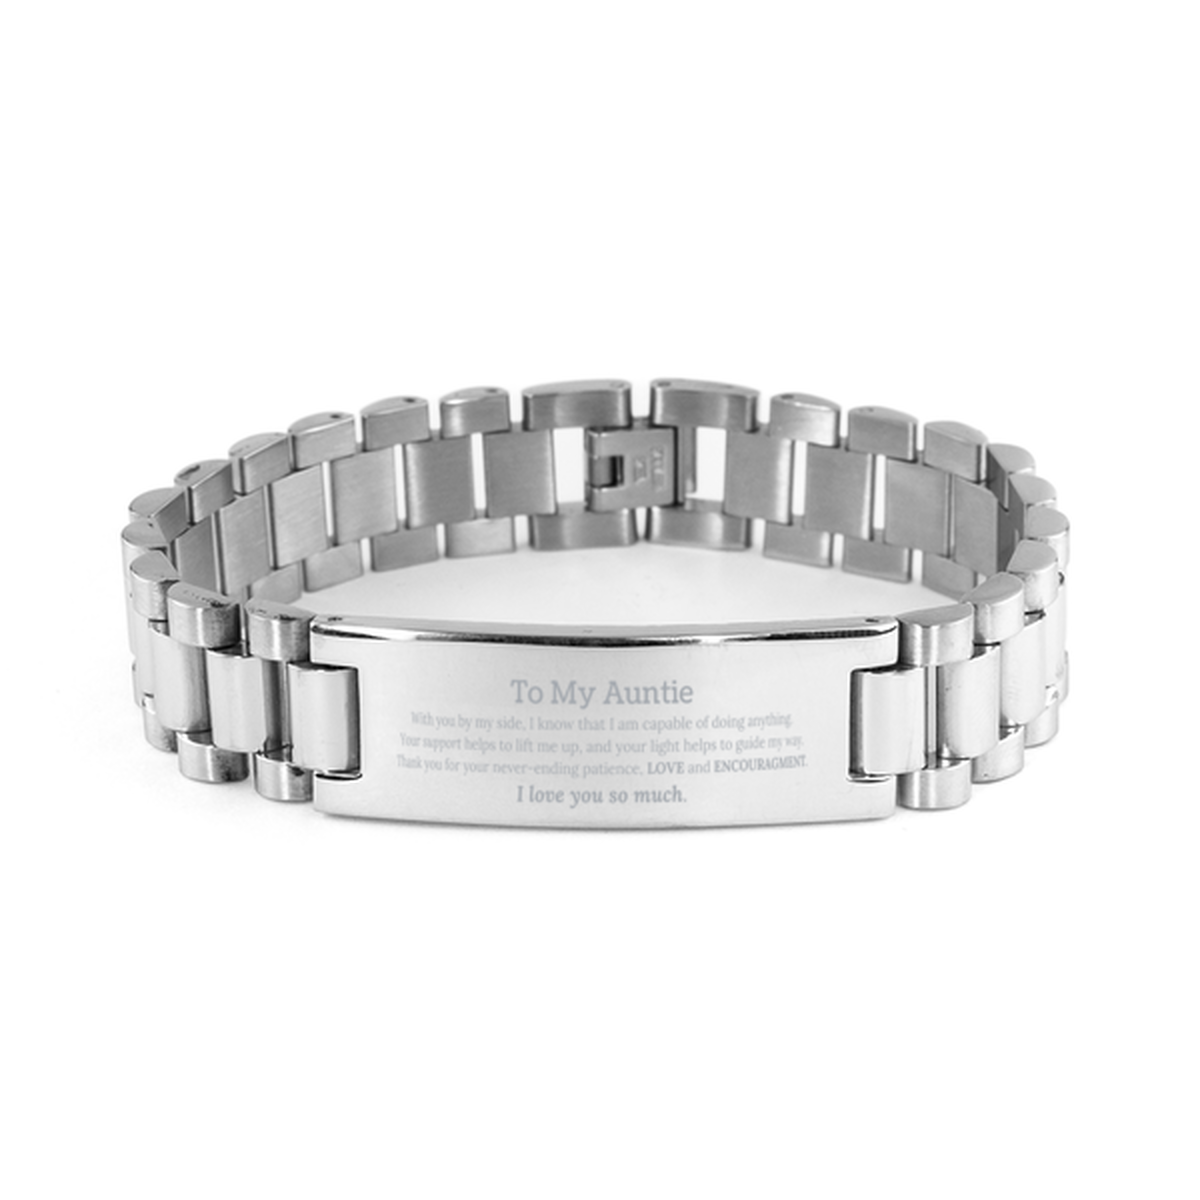 Appreciation Auntie Ladder Stainless Steel Bracelet Gifts, To My Auntie Birthday Christmas Wedding Keepsake Gifts for Auntie With you by my side, I know that I am capable of doing anything. I love you so much